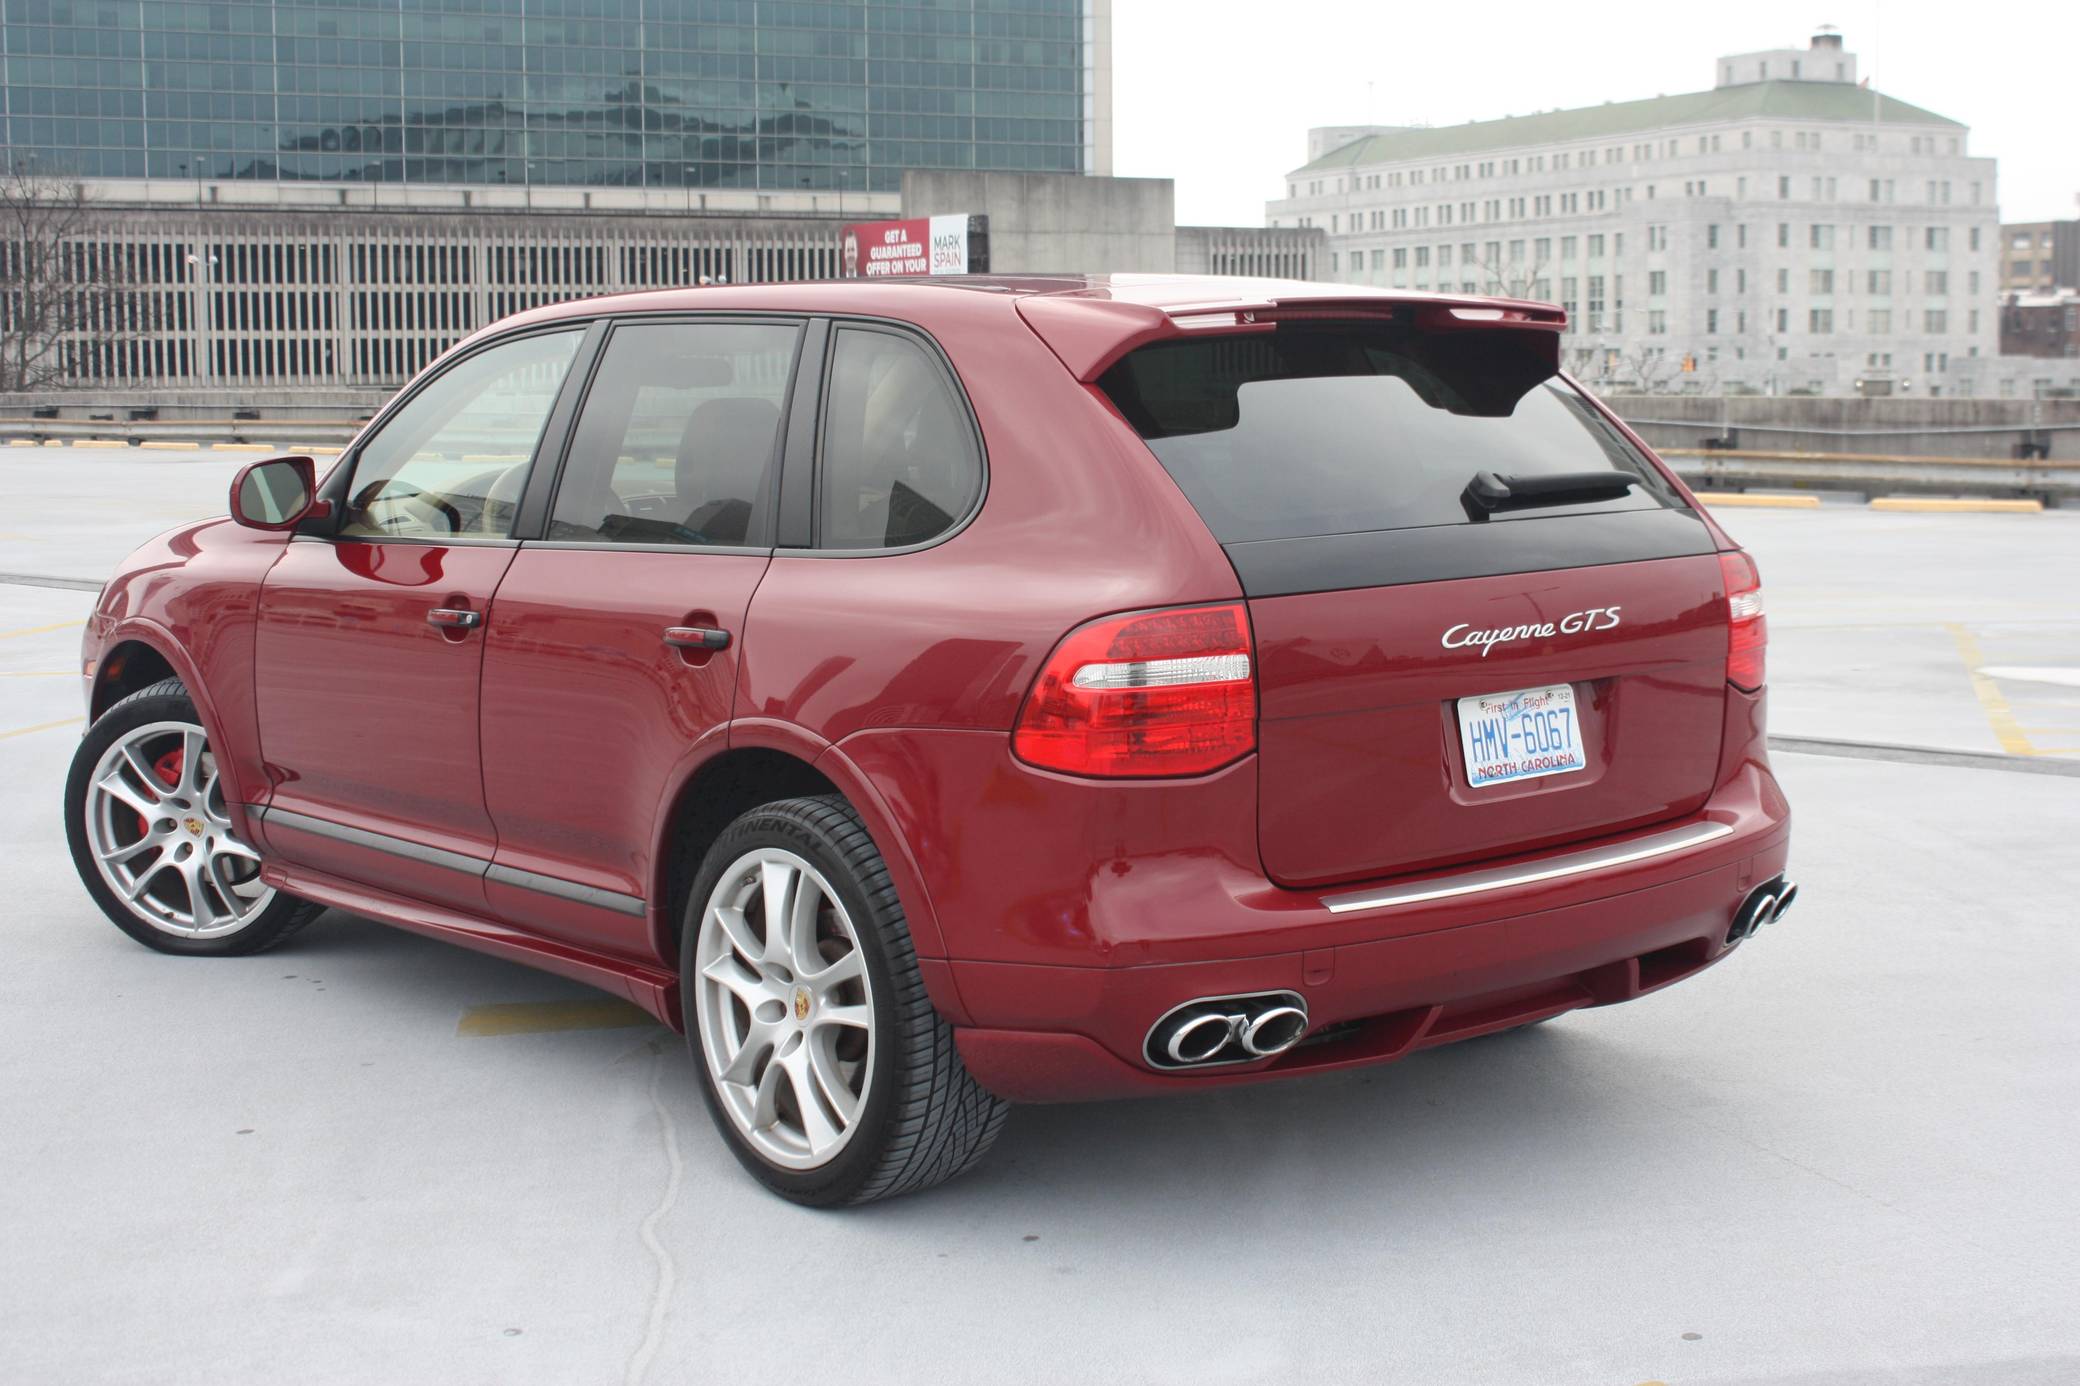 2009 Porsche Cayenne GTS With SixSpeed Manual Is A Rare